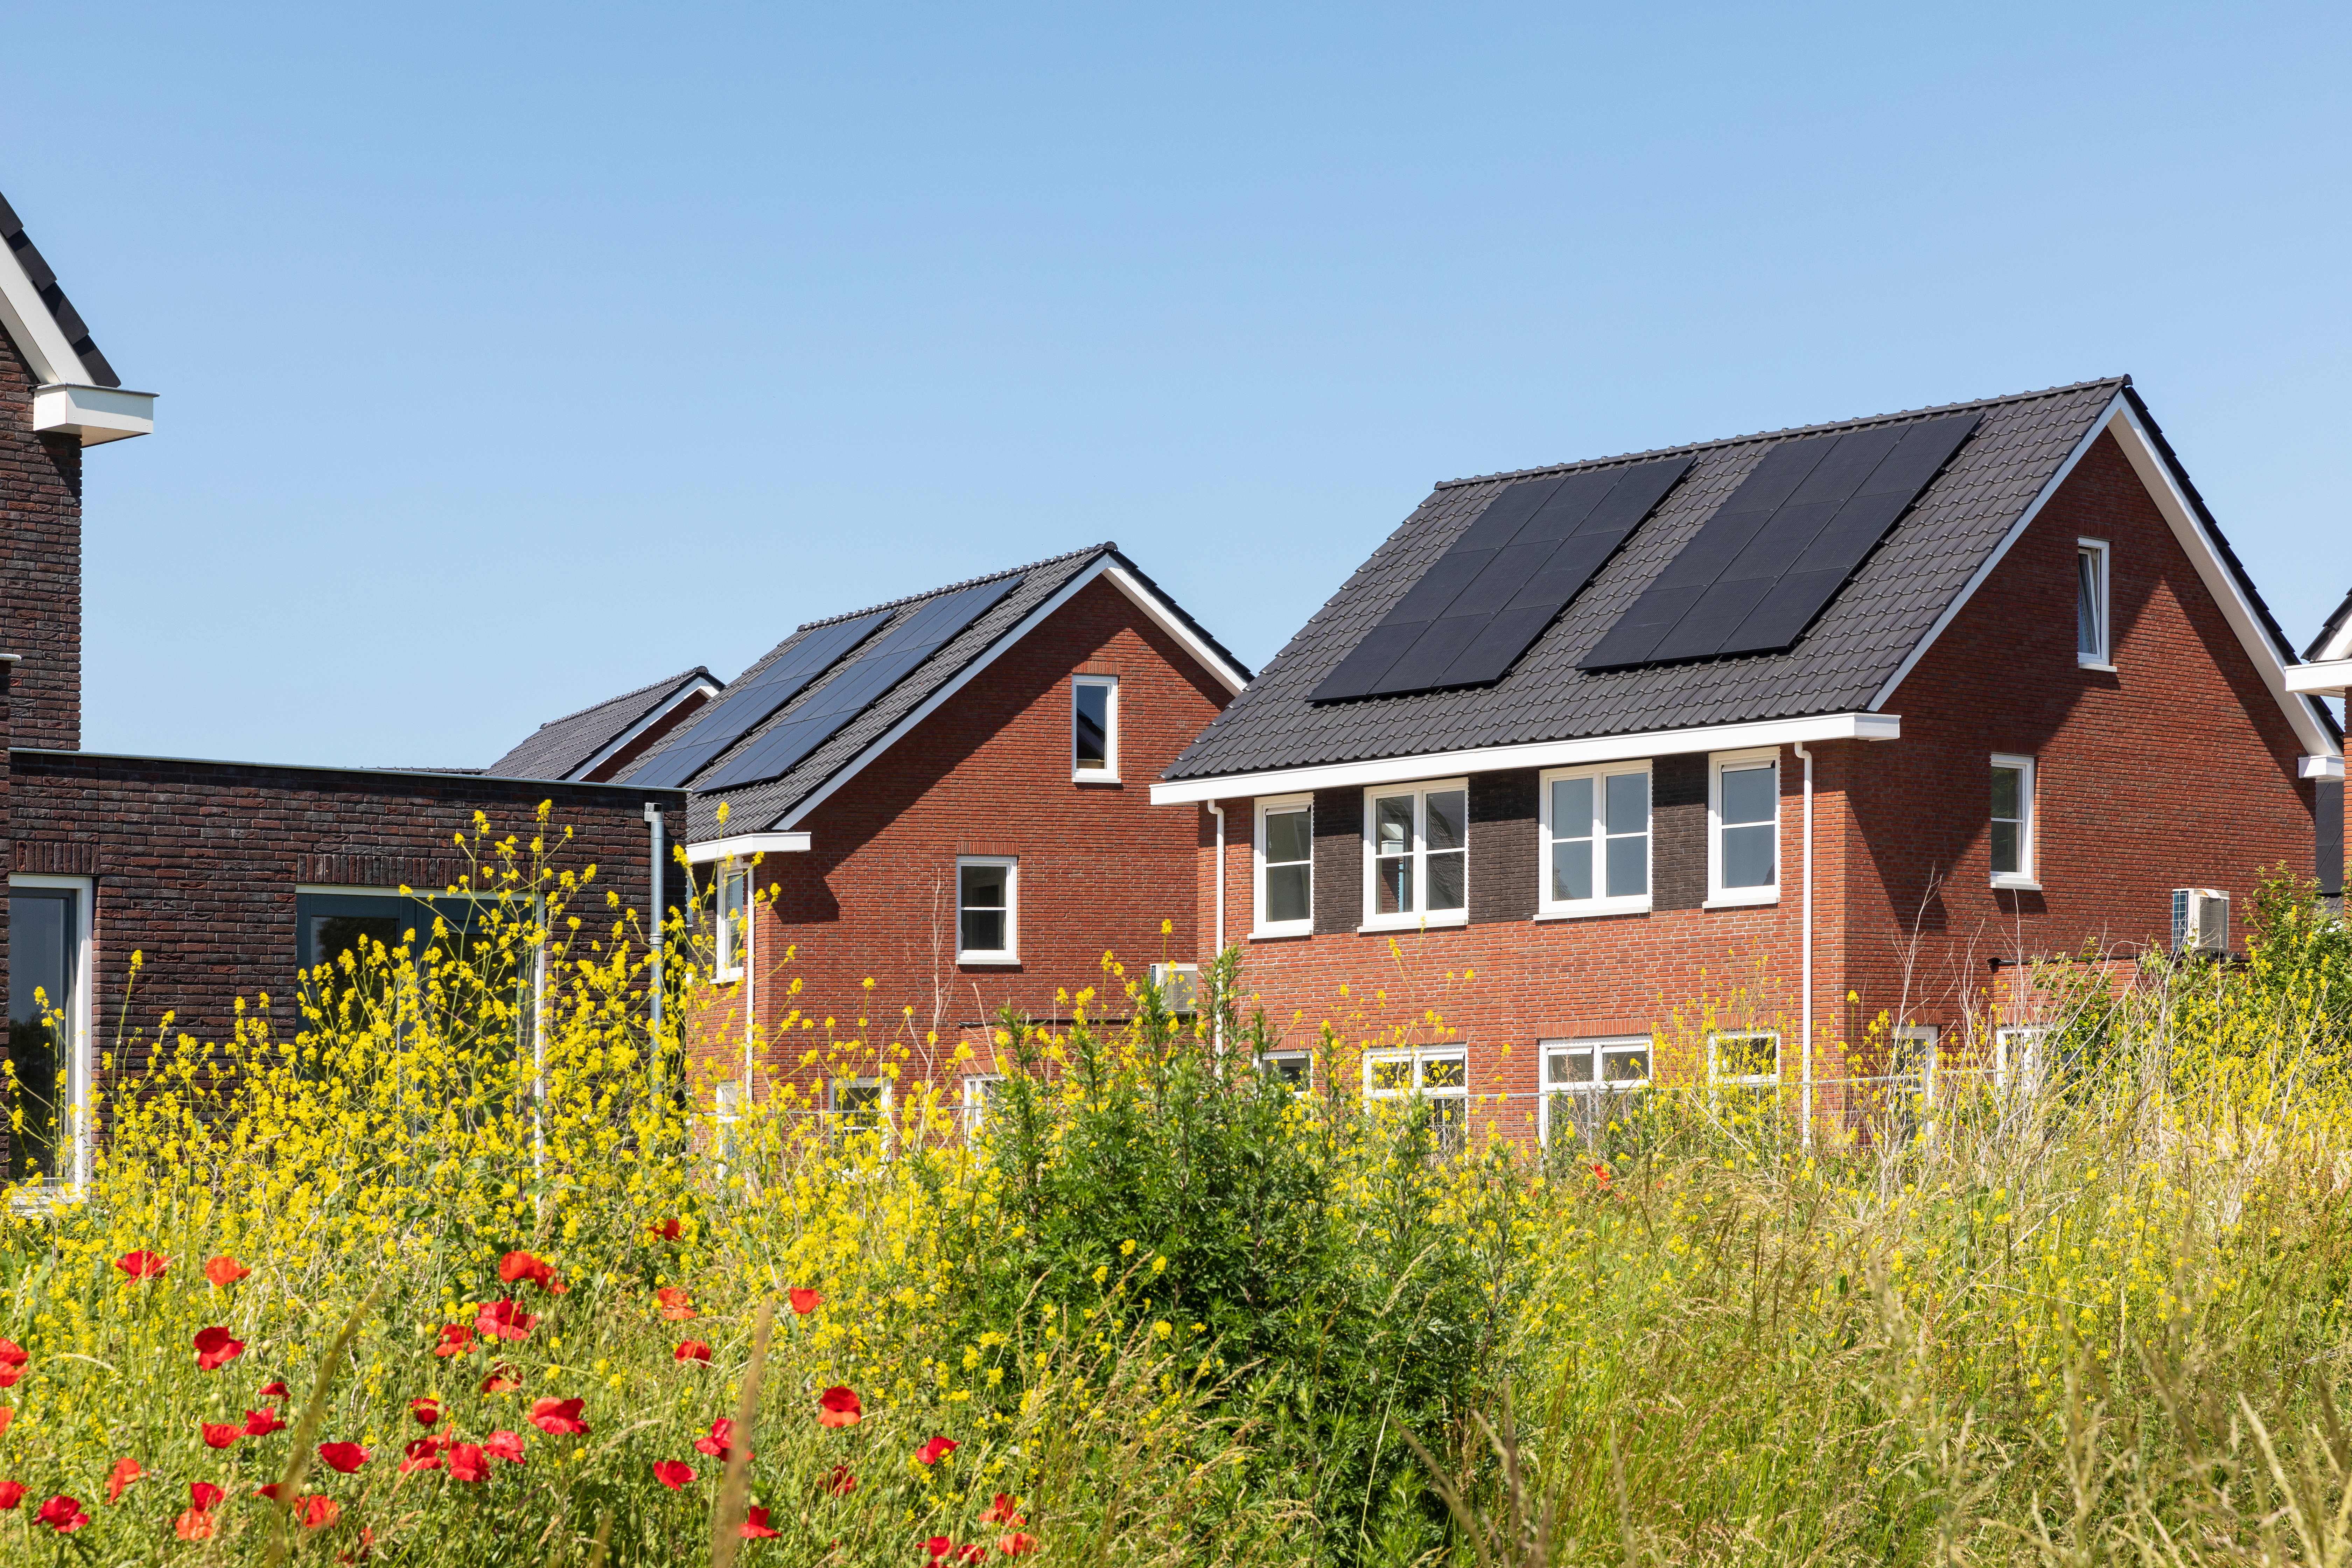 BRE joins new projects funded by Innovate UK’s Net Zero Heat programme